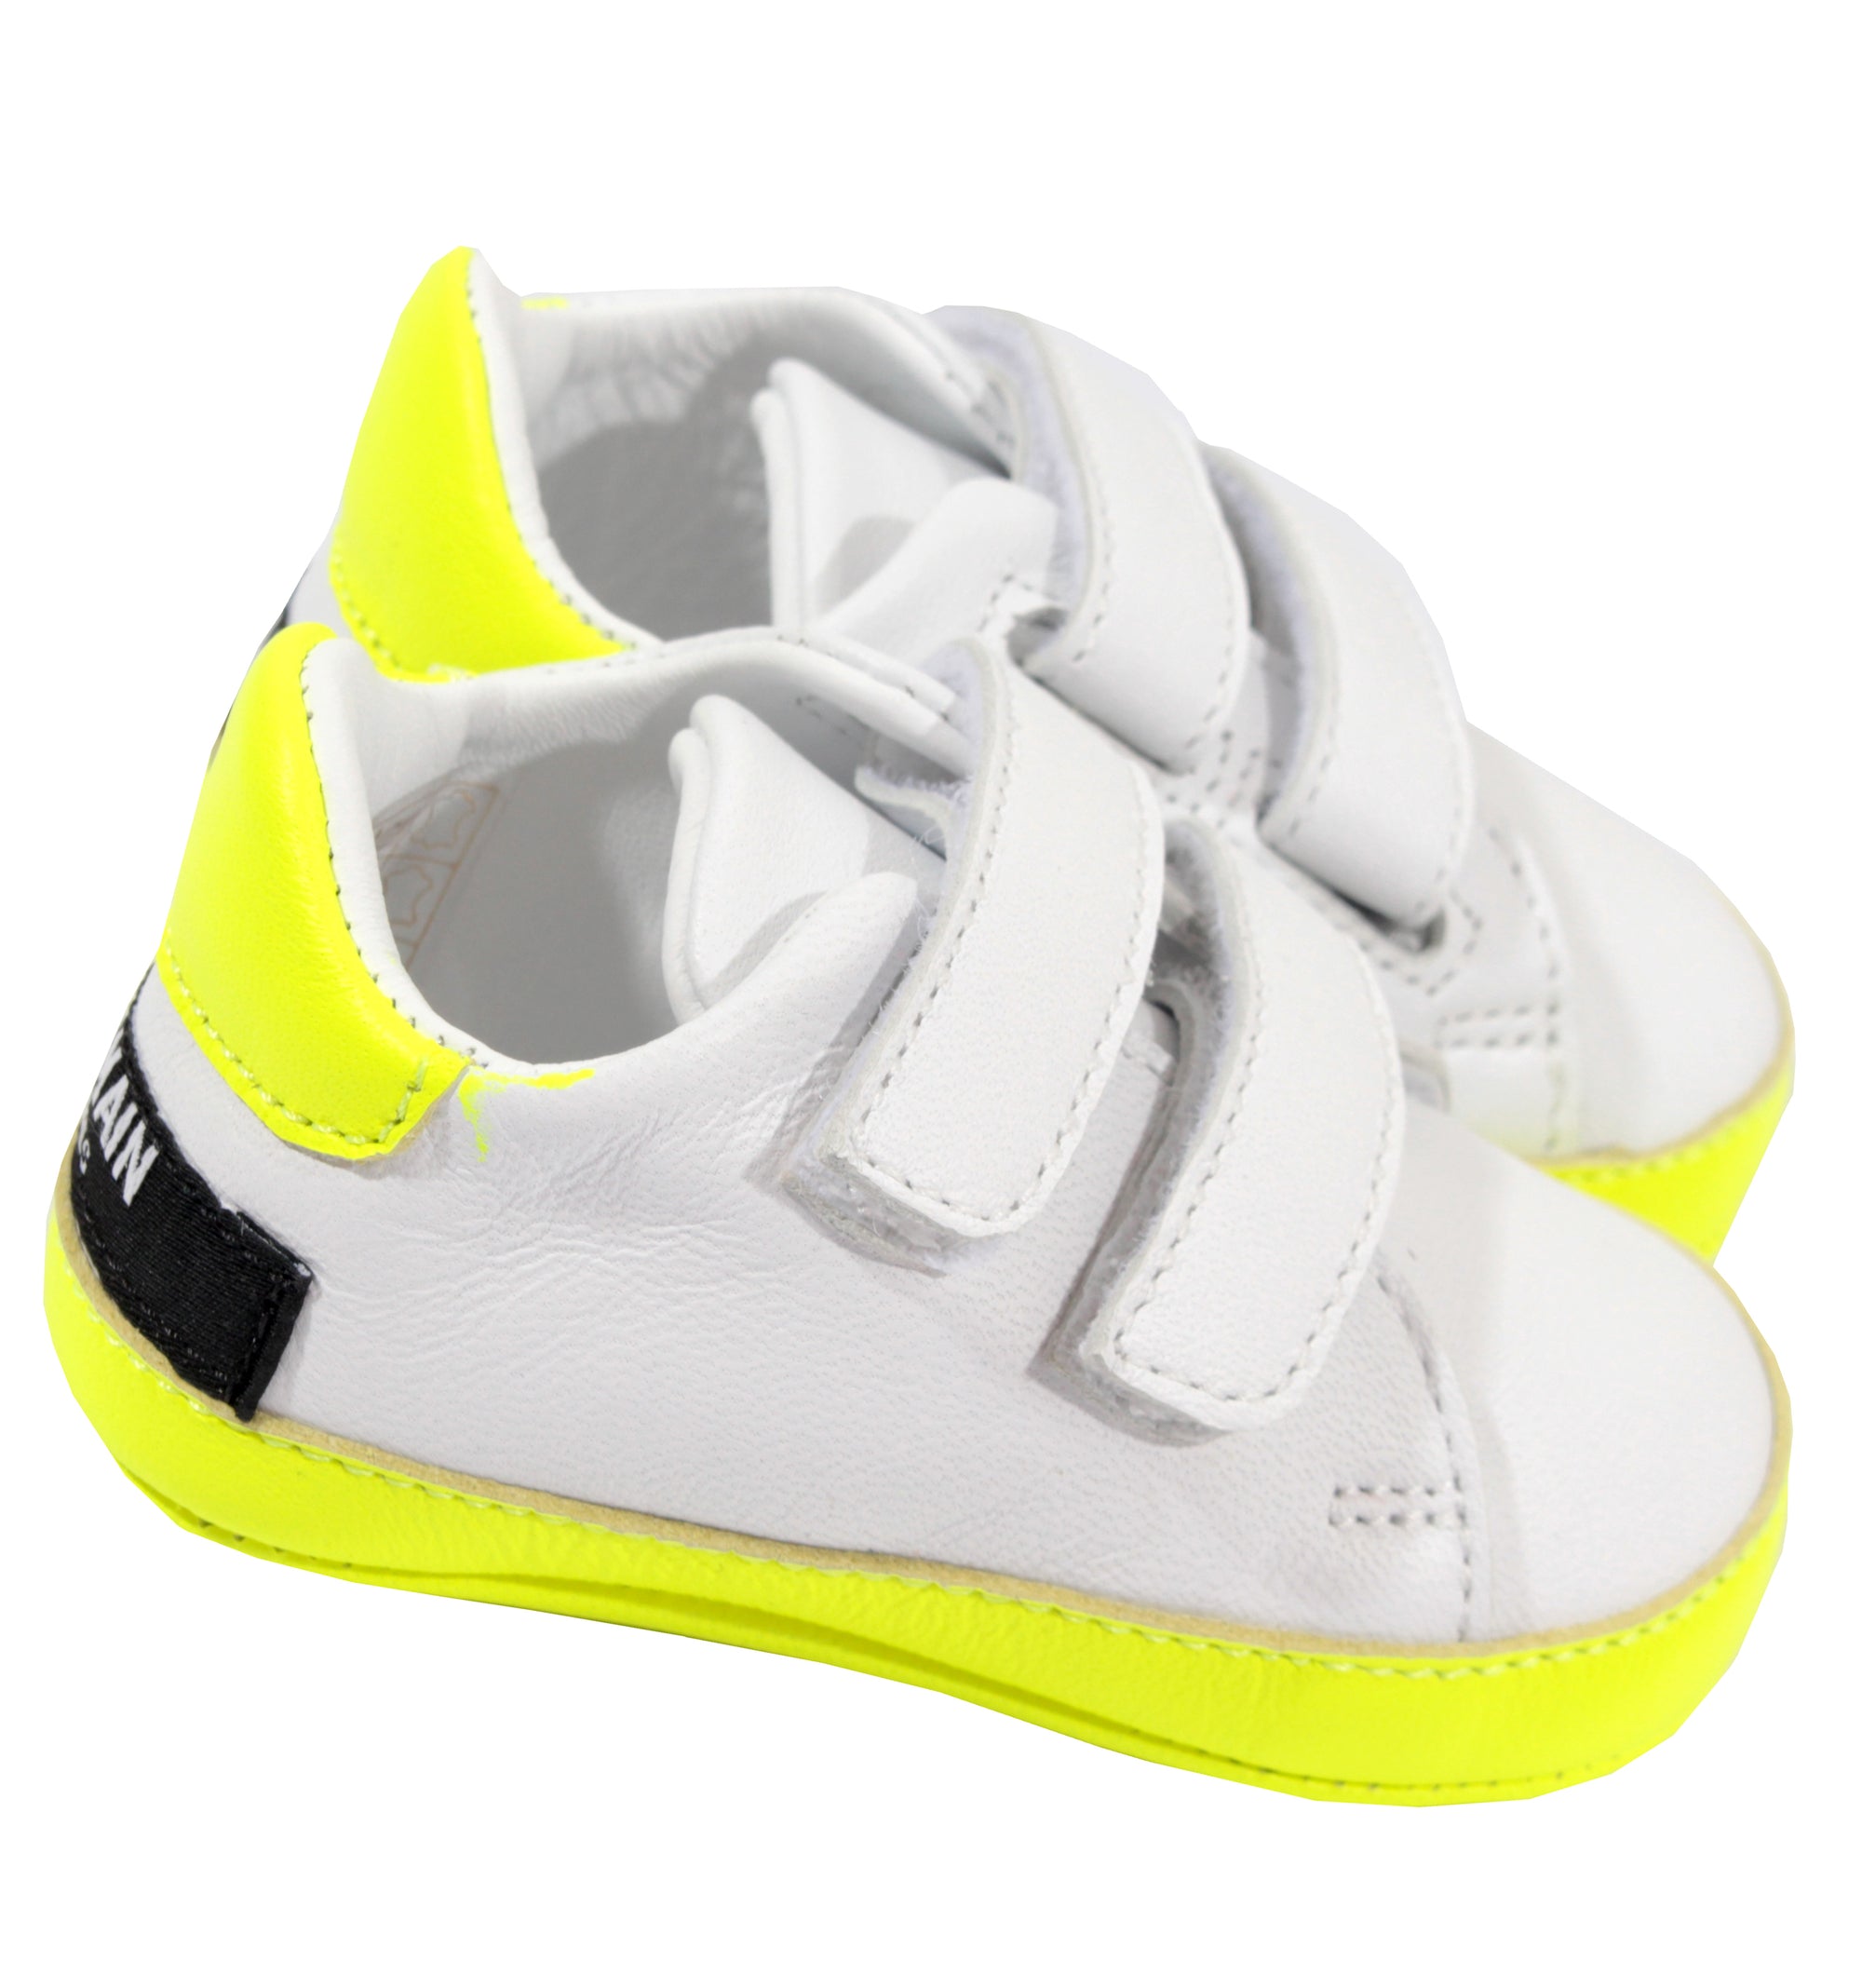 Crib Shoes With Contrast Soles - White & Yellow